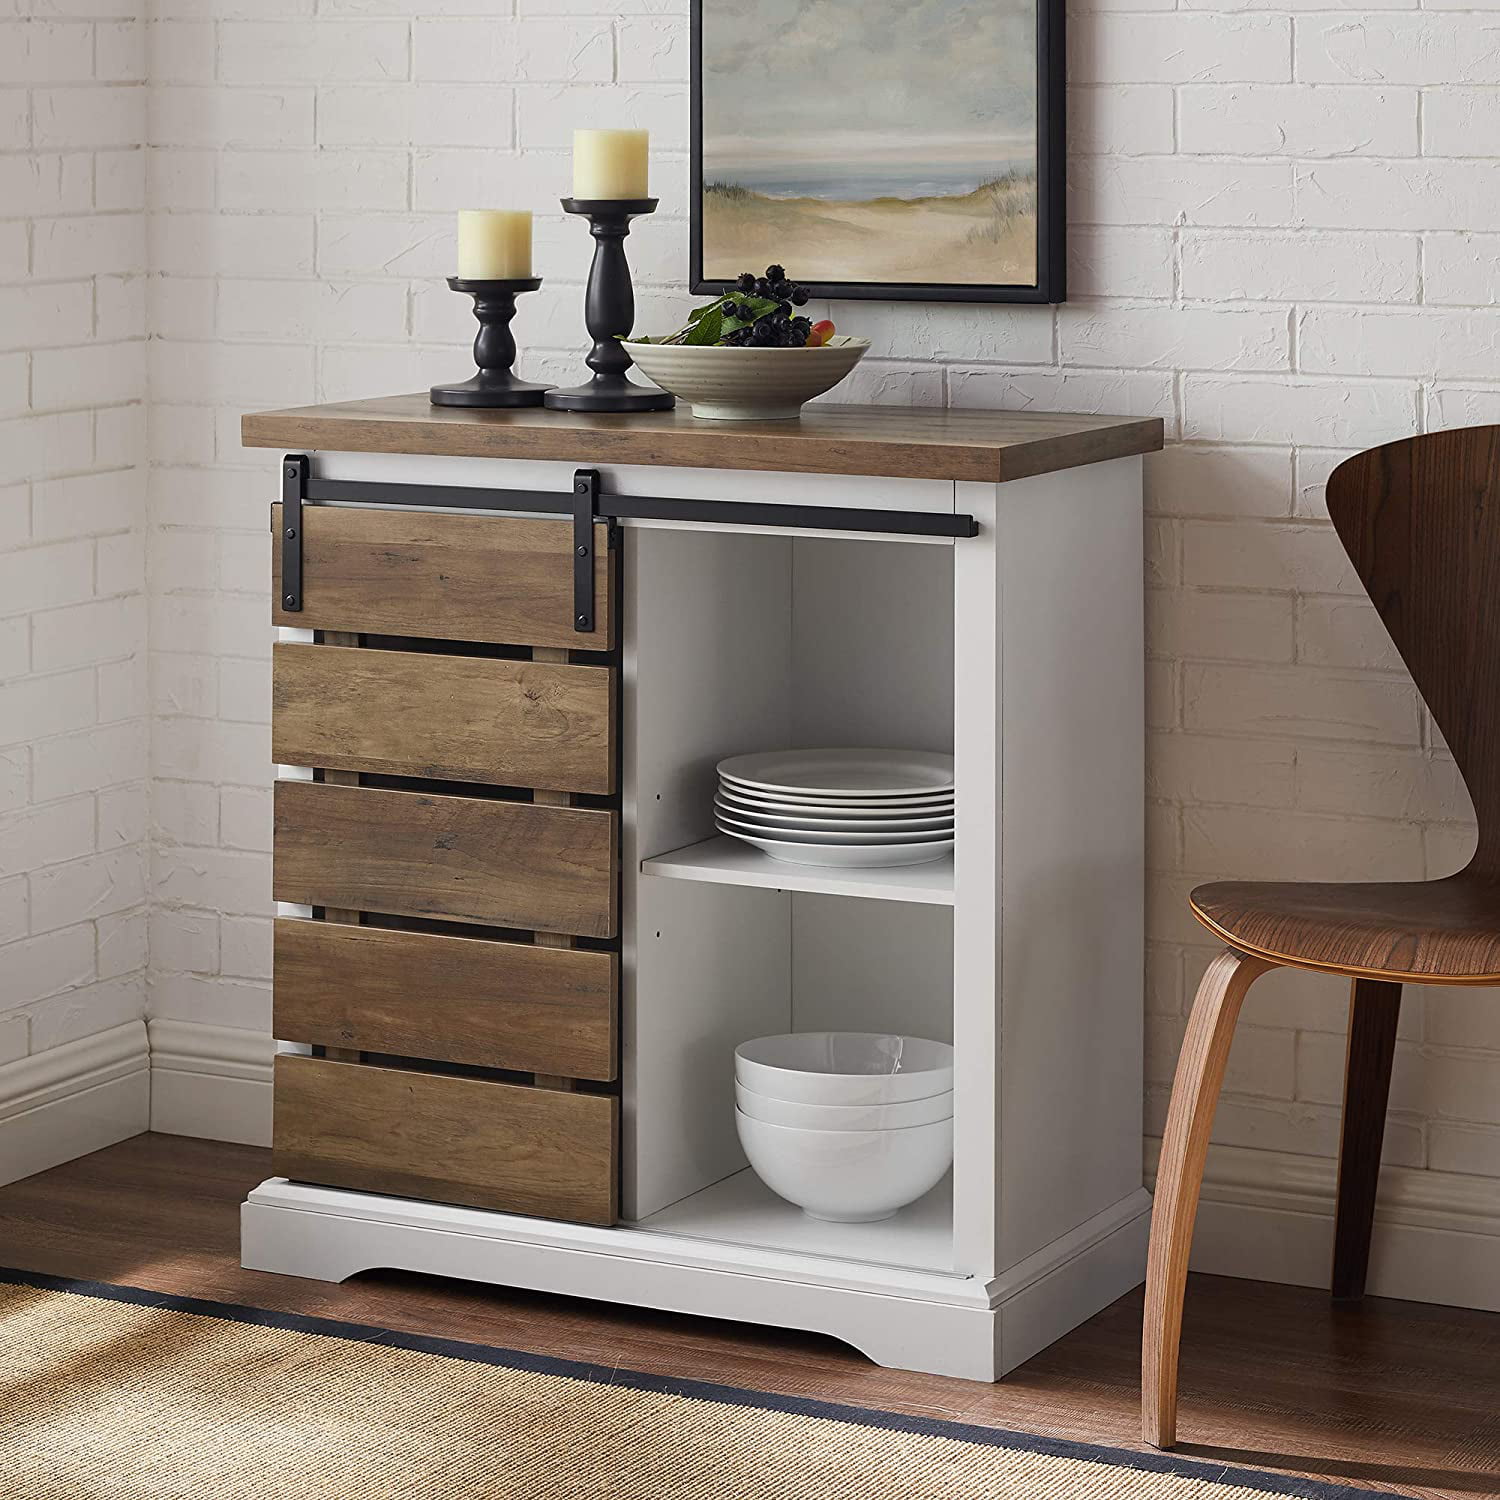 Details about   Modern Farmhouse Buffet Entryway Bar Cabinet Stora Entry Table Living Room 32 